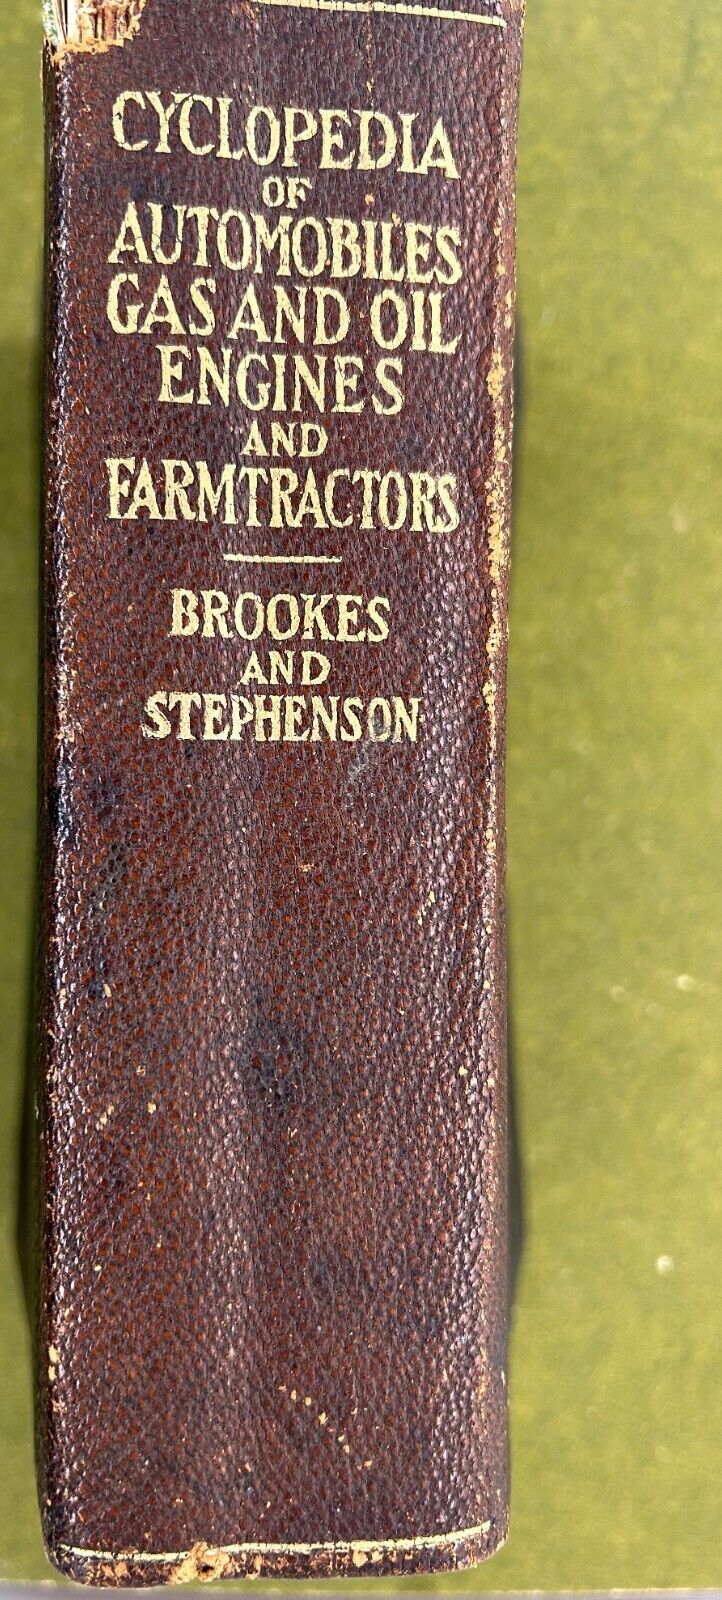 BROOKES AND STEPHENSON 1916 CYCLOPEDIA GAS AND OIL ENGINES AND FARMTRACTORS